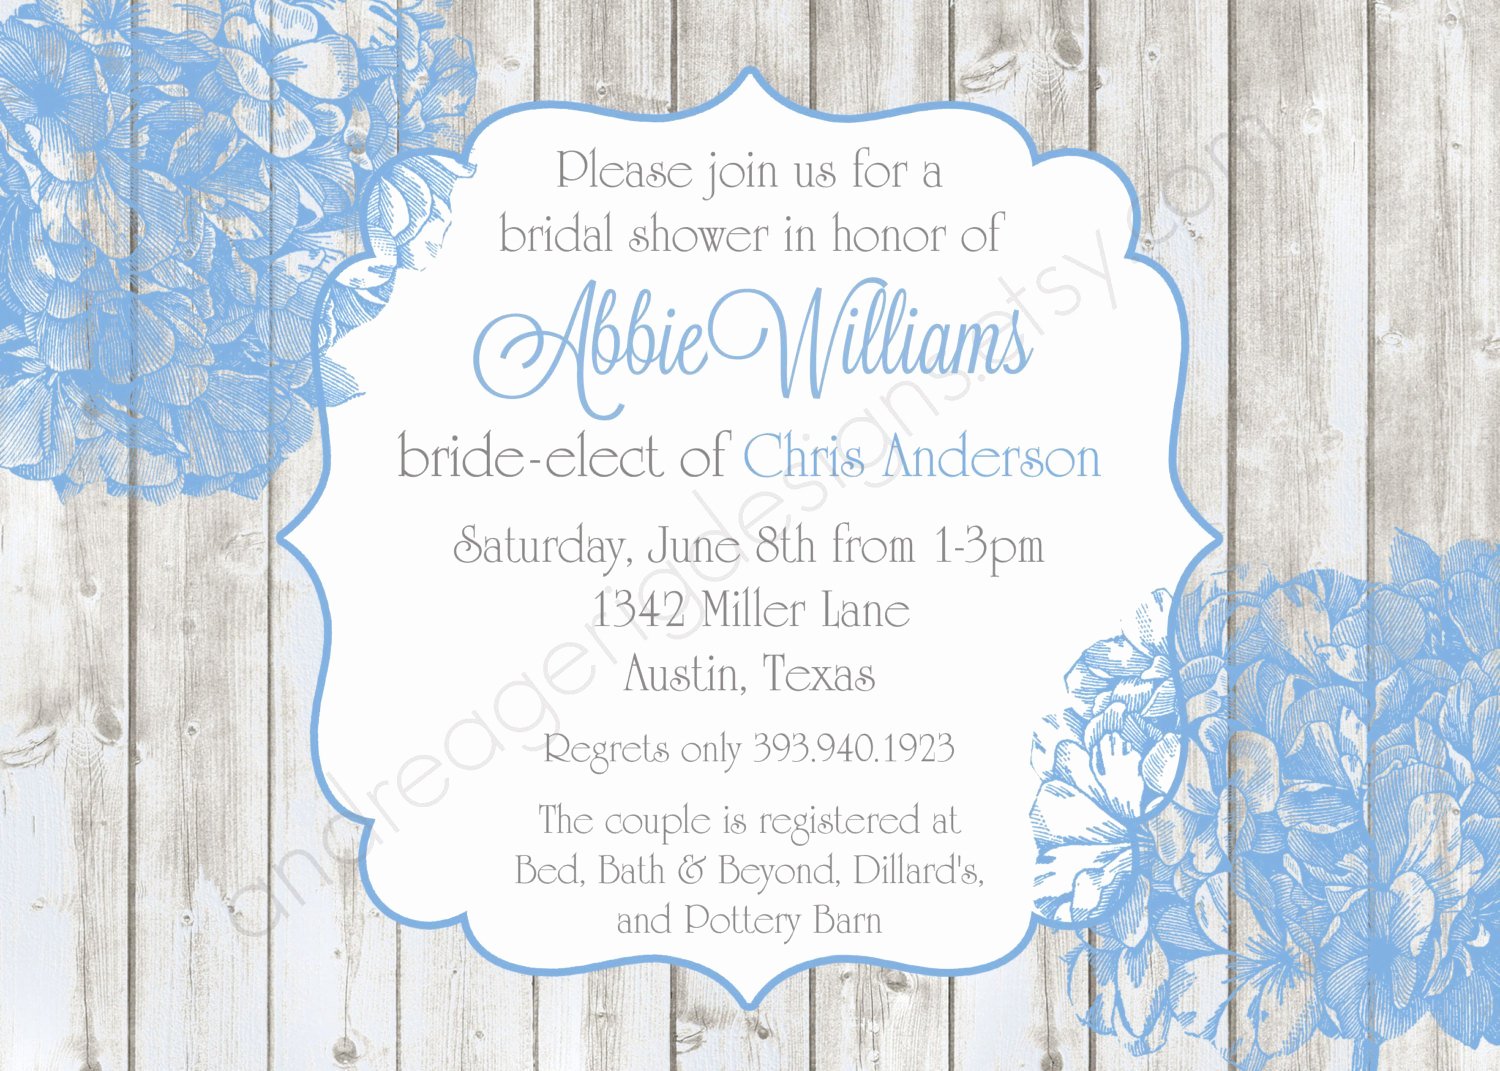 Bridal Shower Invite Template Awesome Bridal Shower Invitations Microsoft Word Bridal Shower